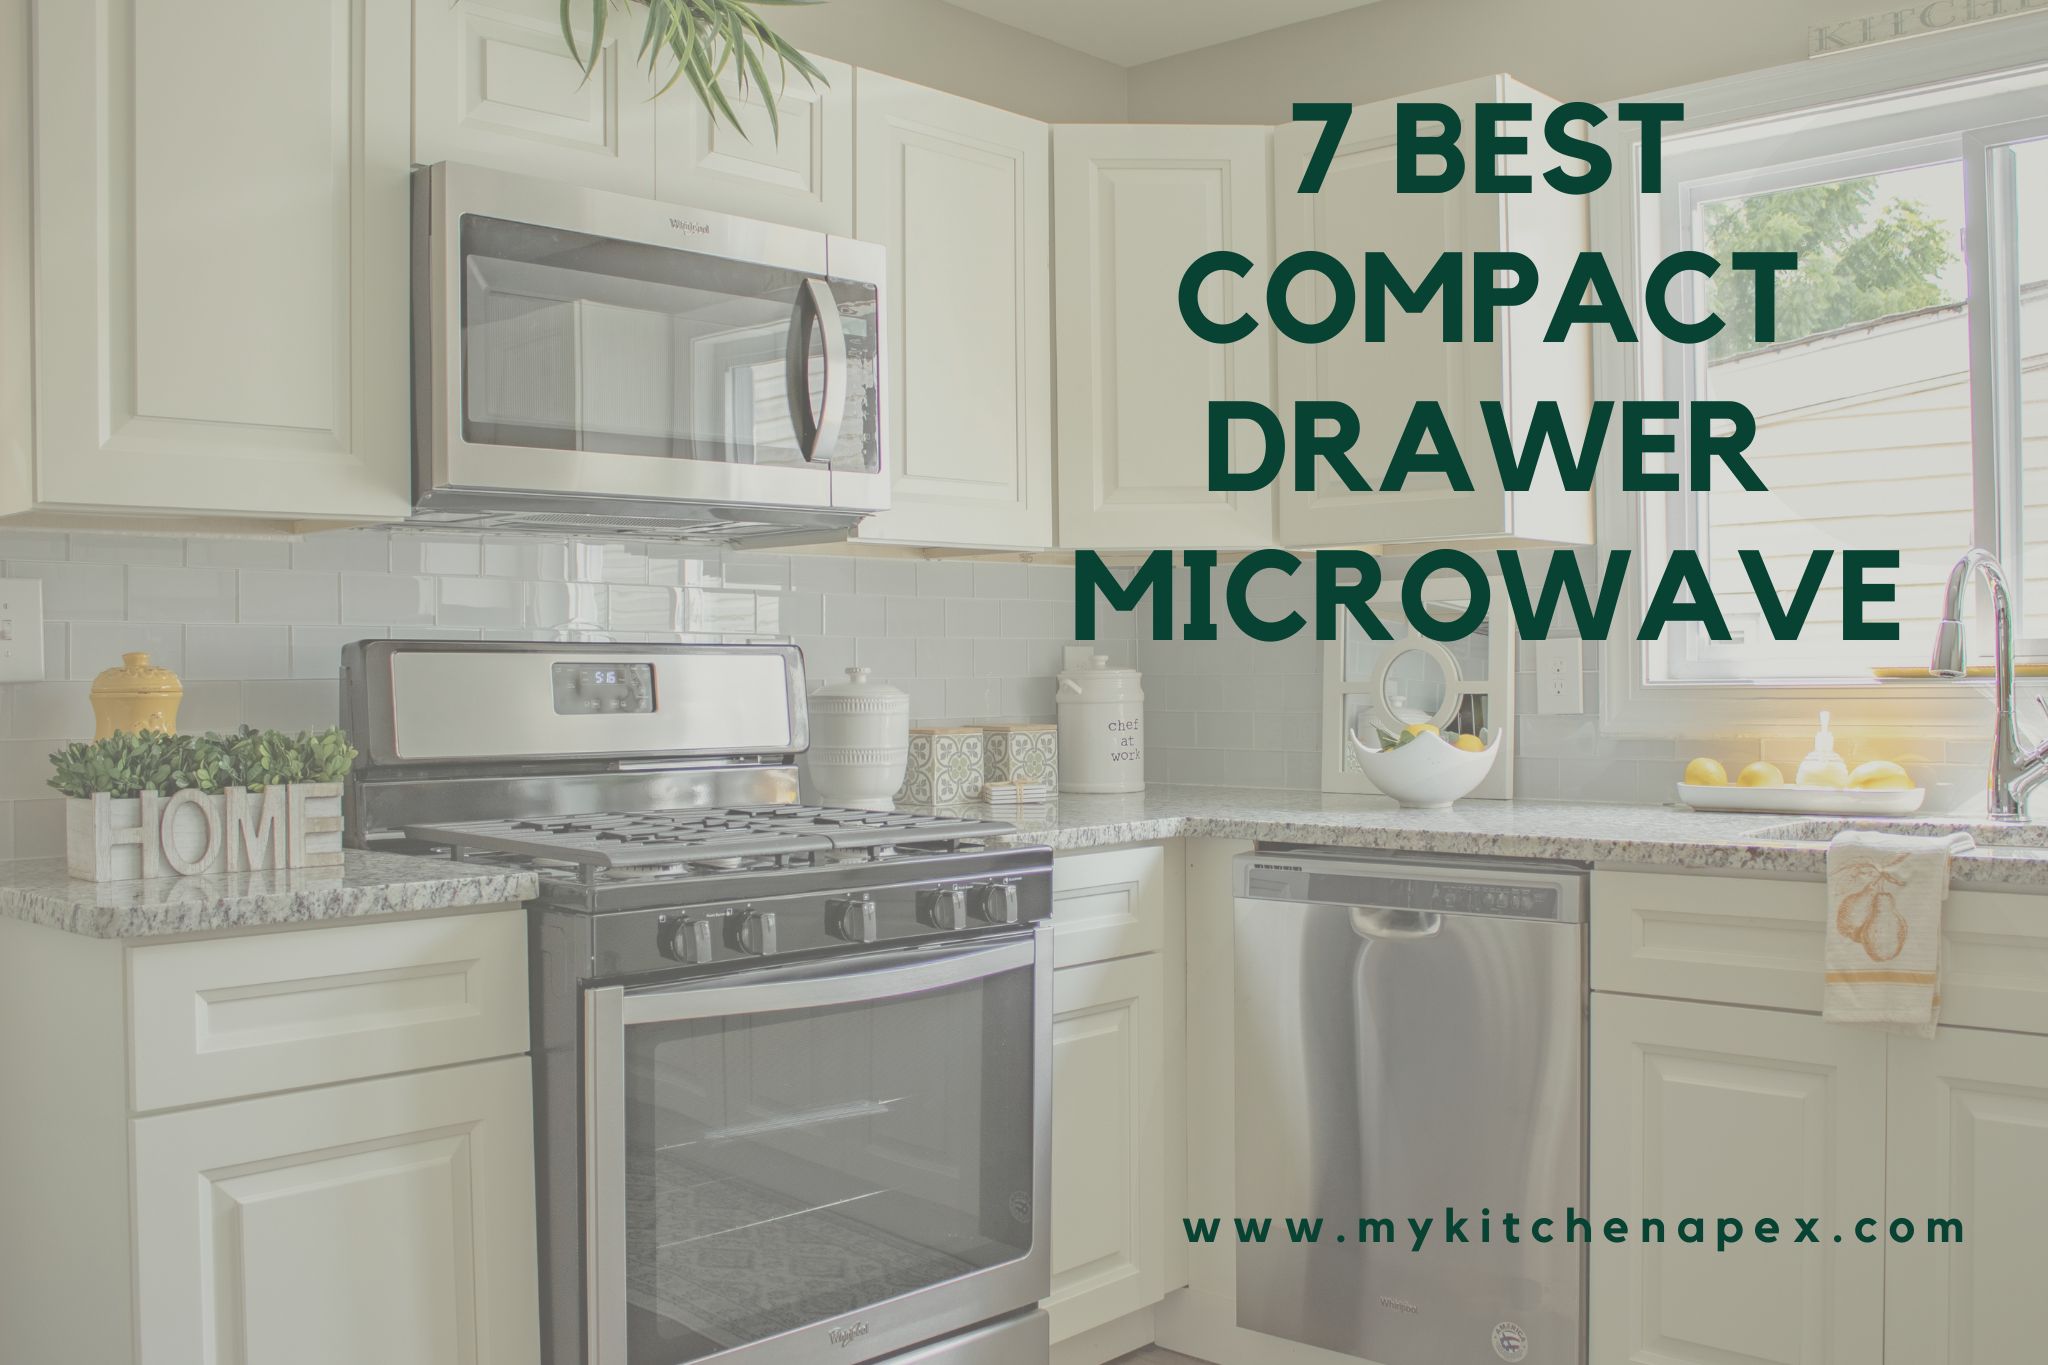 Best Compact Drawer Microwave